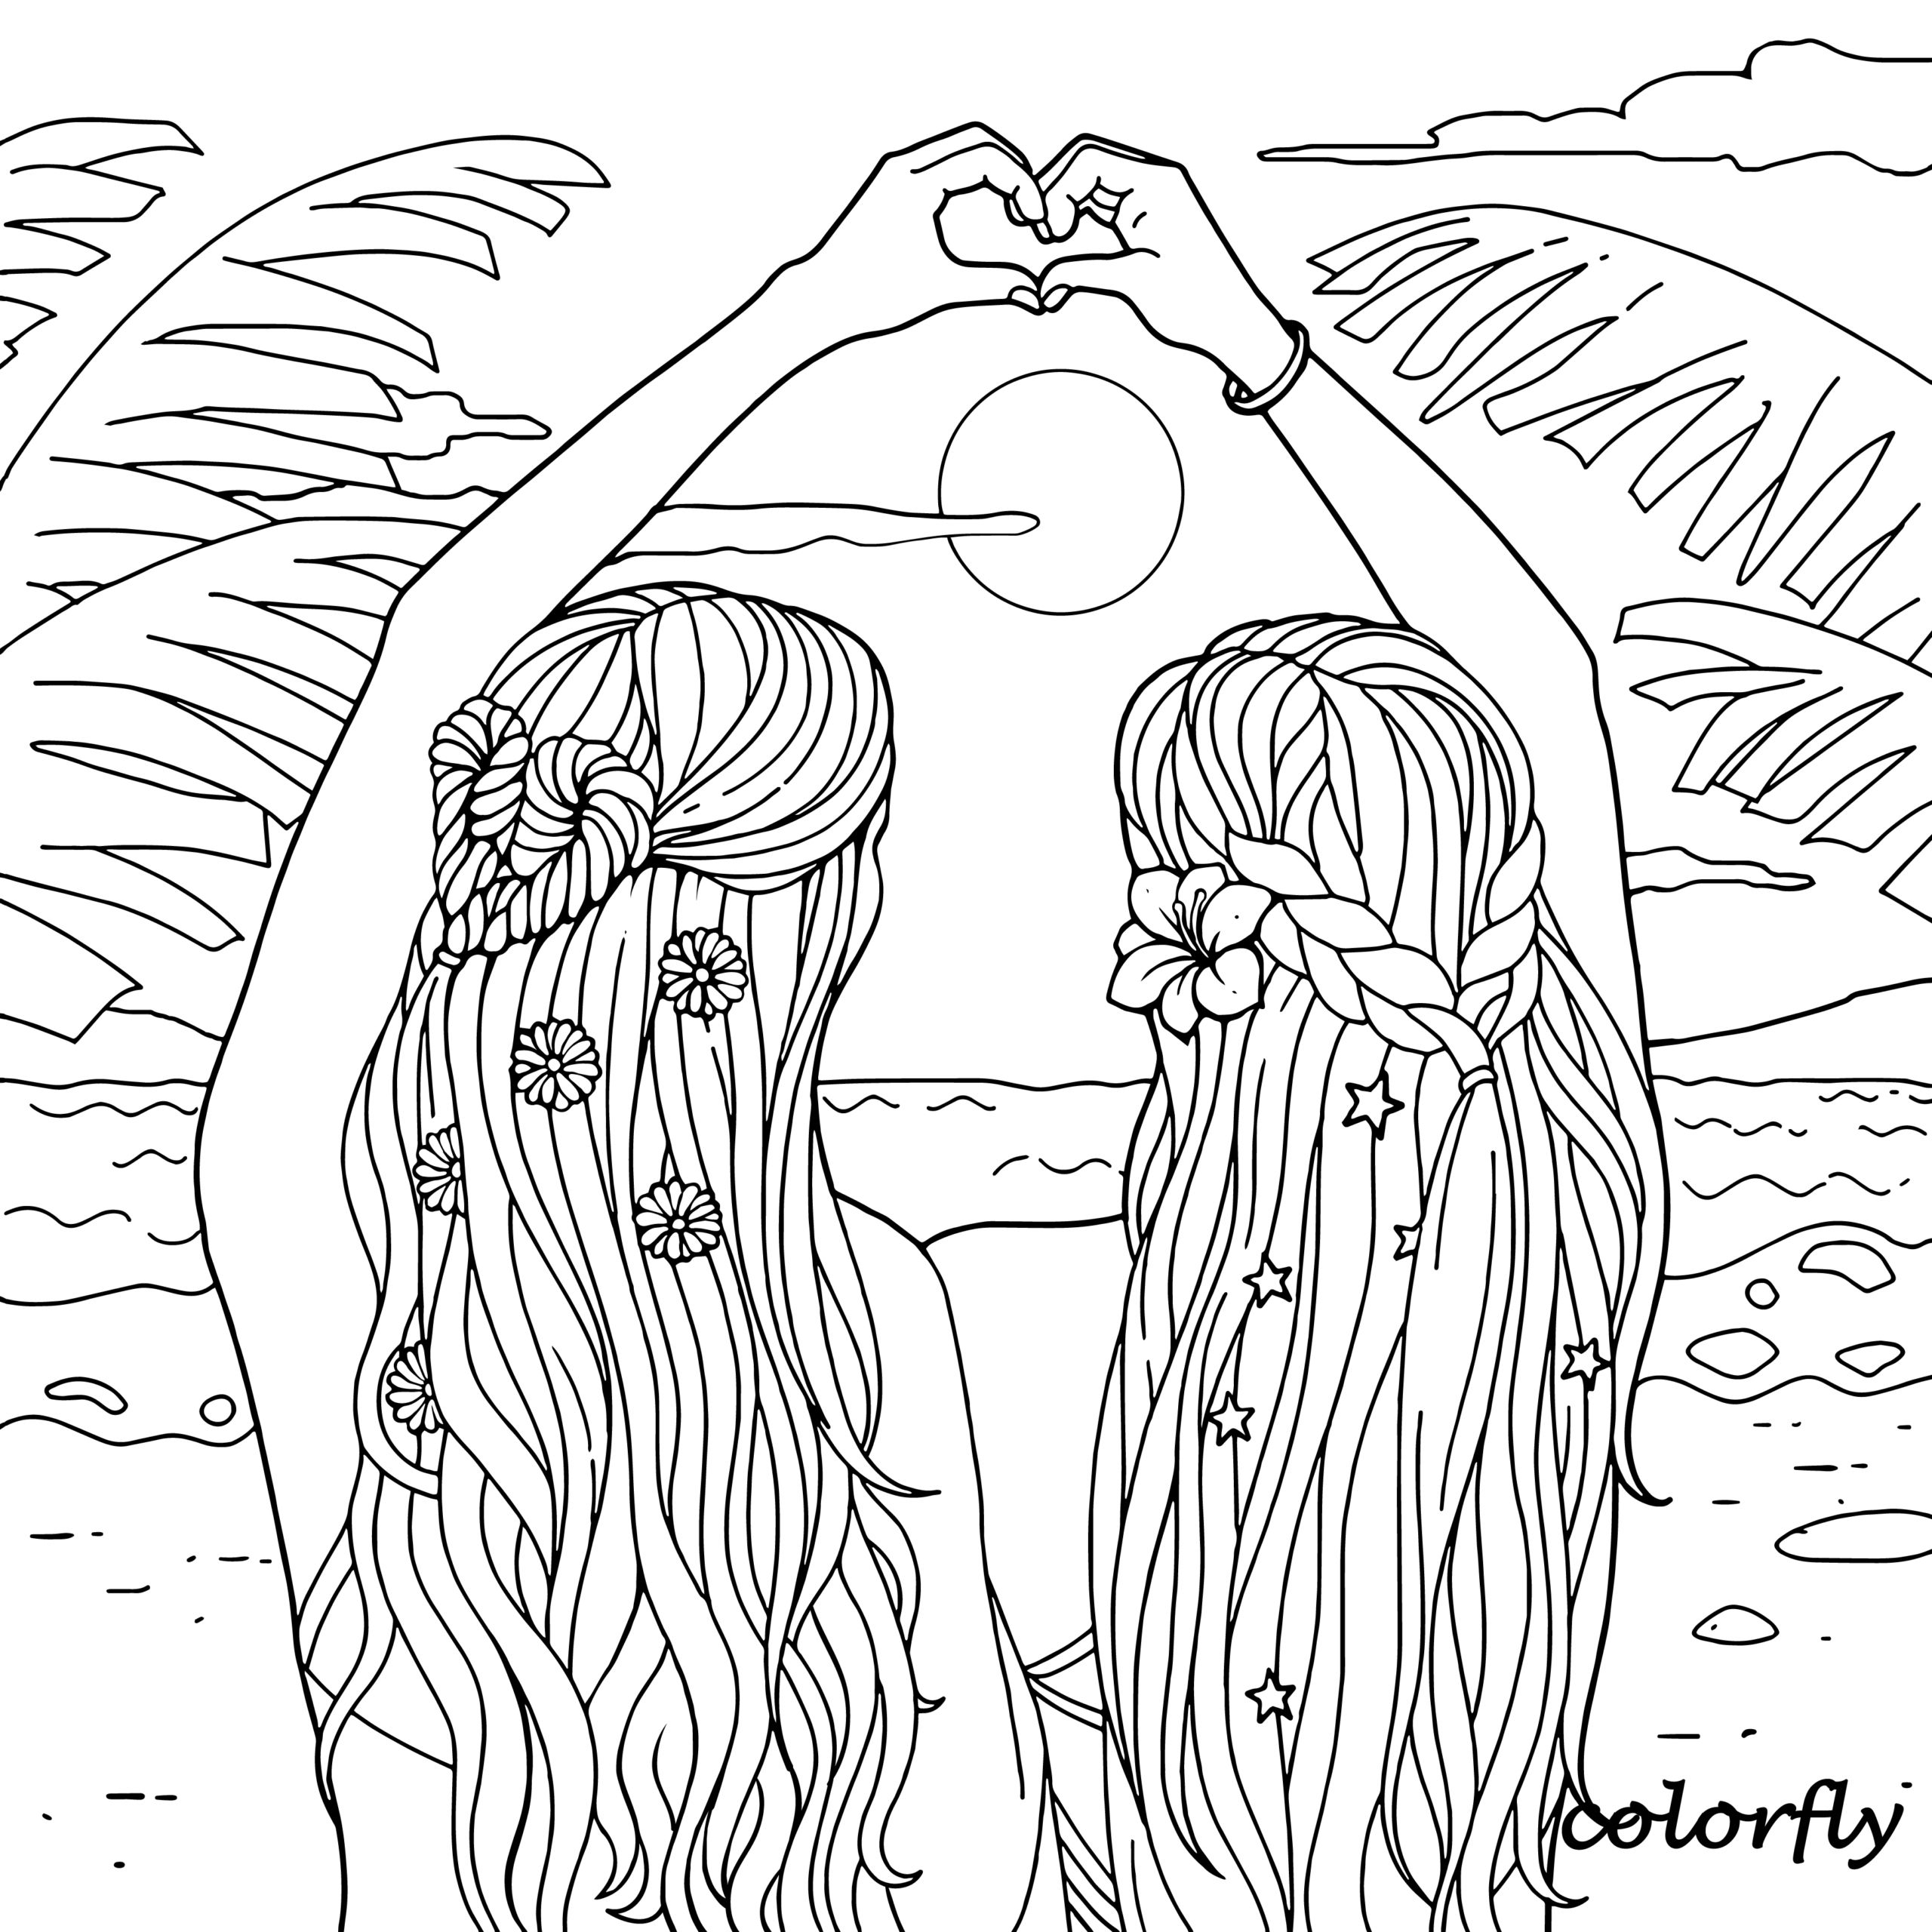 Best Friends Coloring Pages   Coloring Home